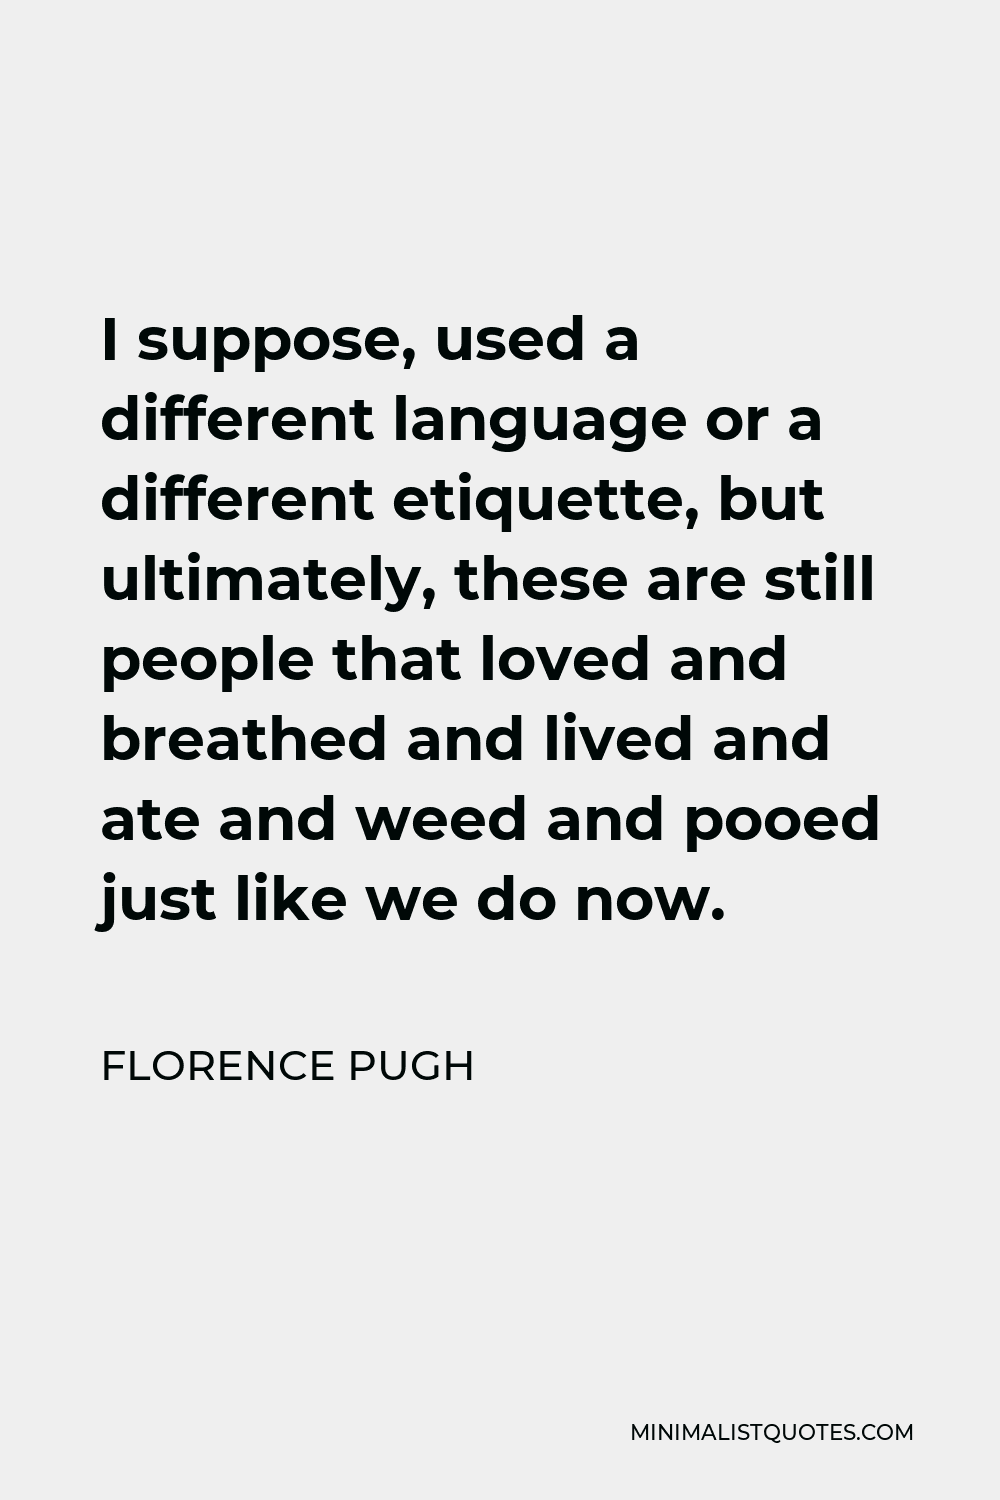 Florence Pugh Quote - I suppose, used a different language or a different etiquette, but ultimately, these are still people that loved and breathed and lived and ate and weed and pooed just like we do now.